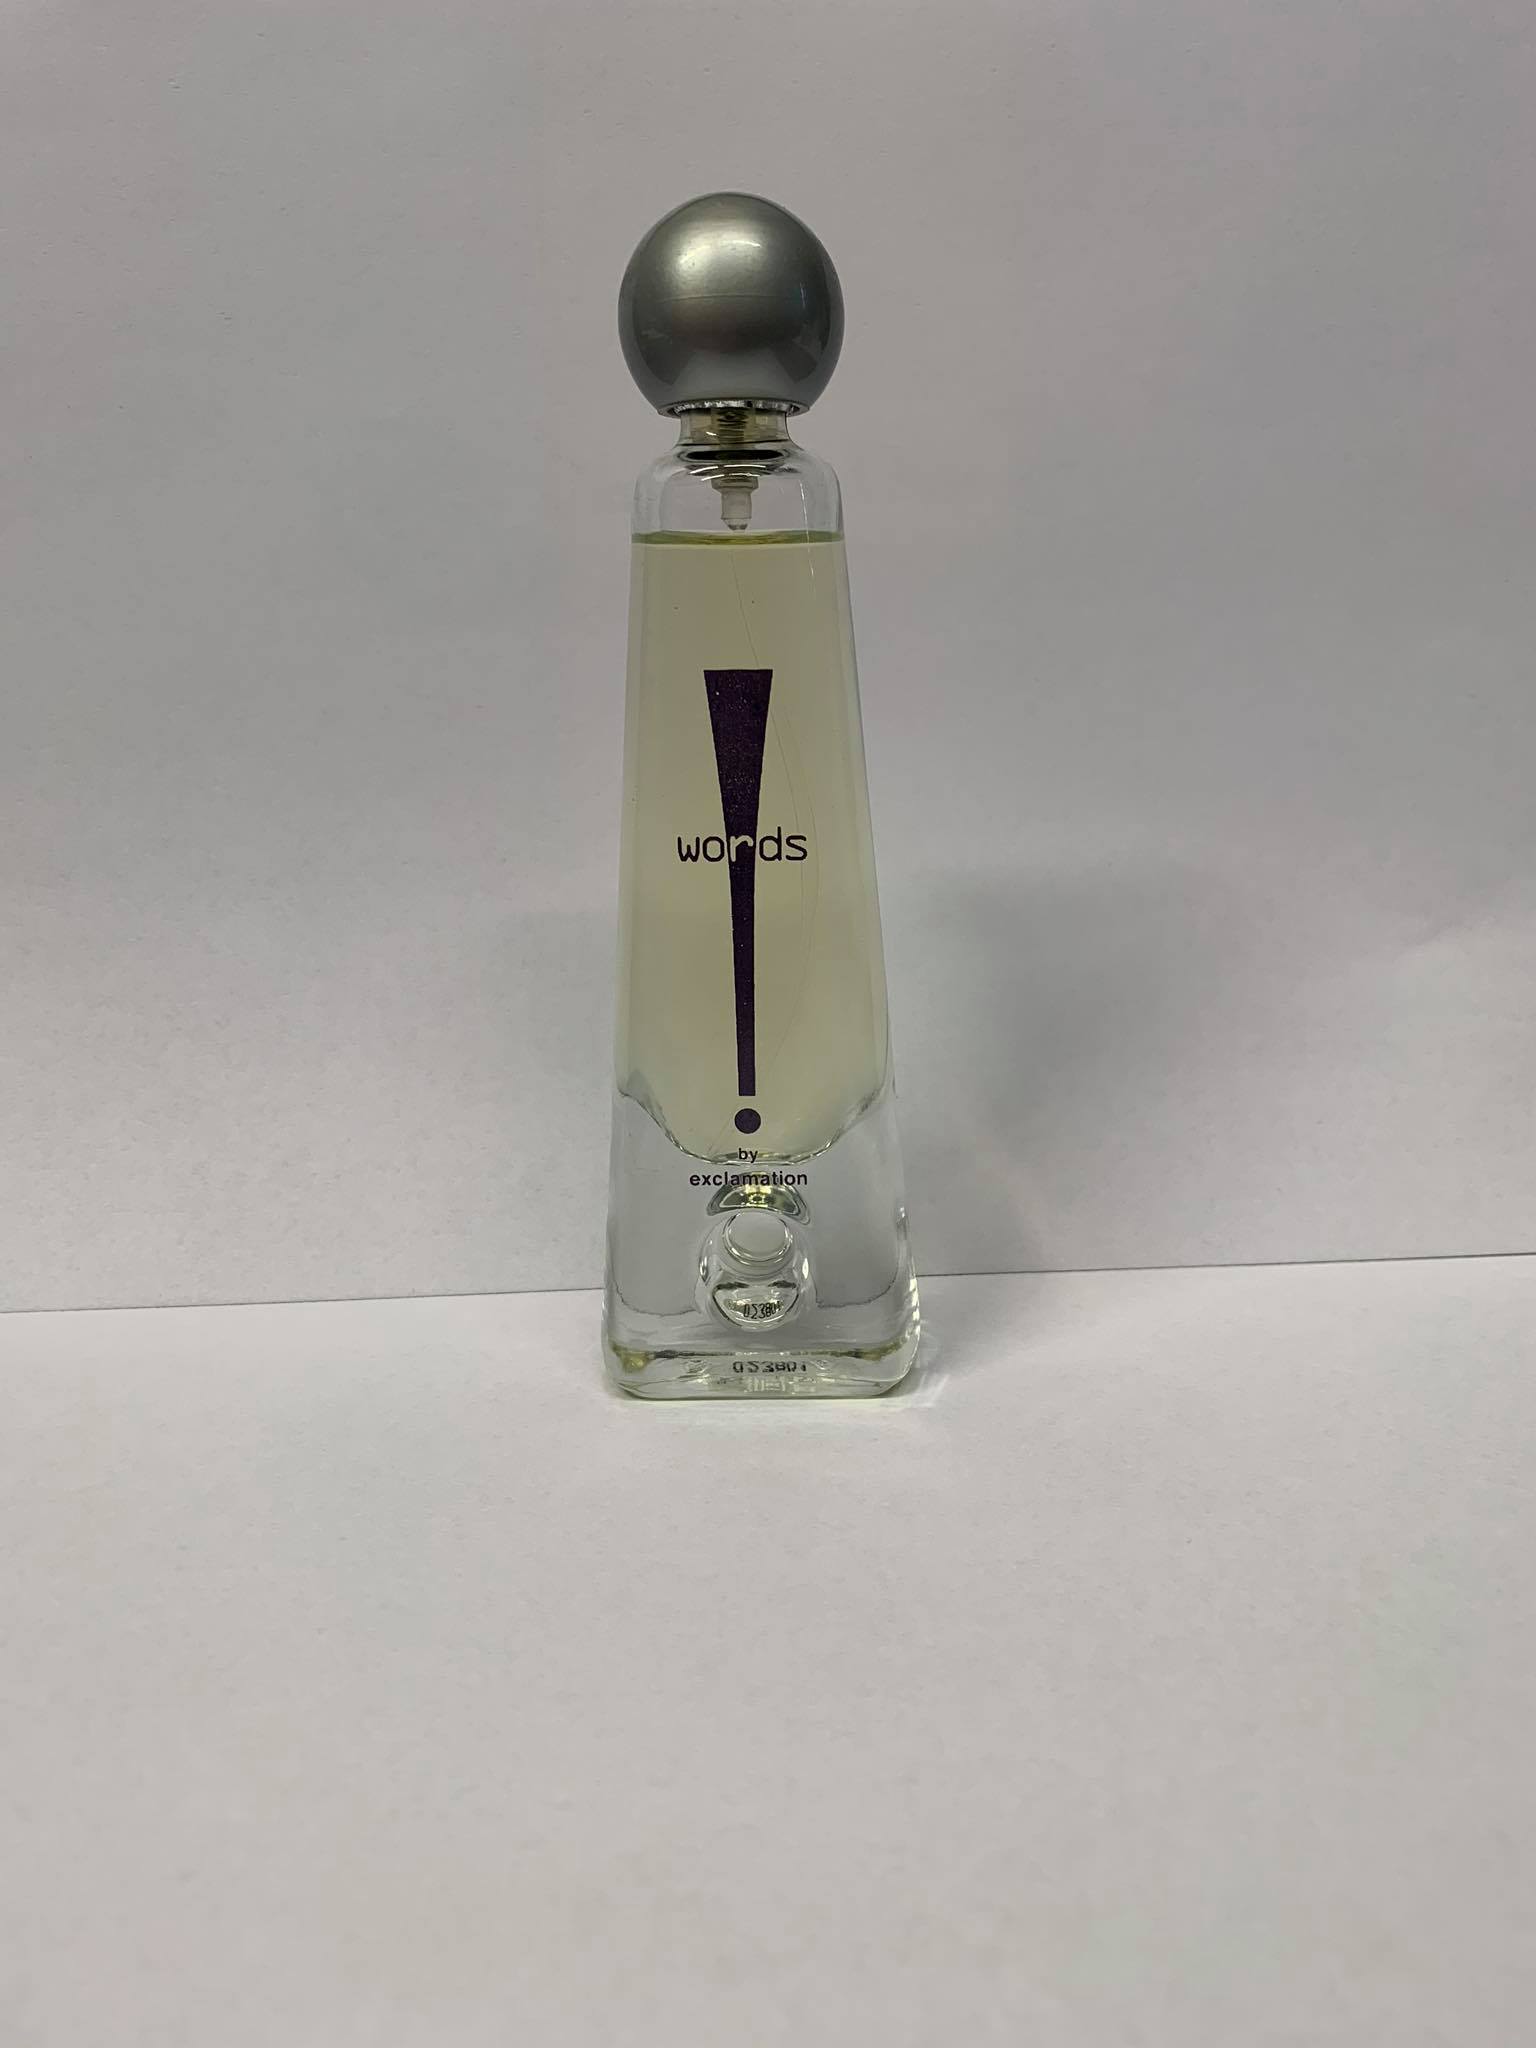 Exclamation Words, edt 30ml